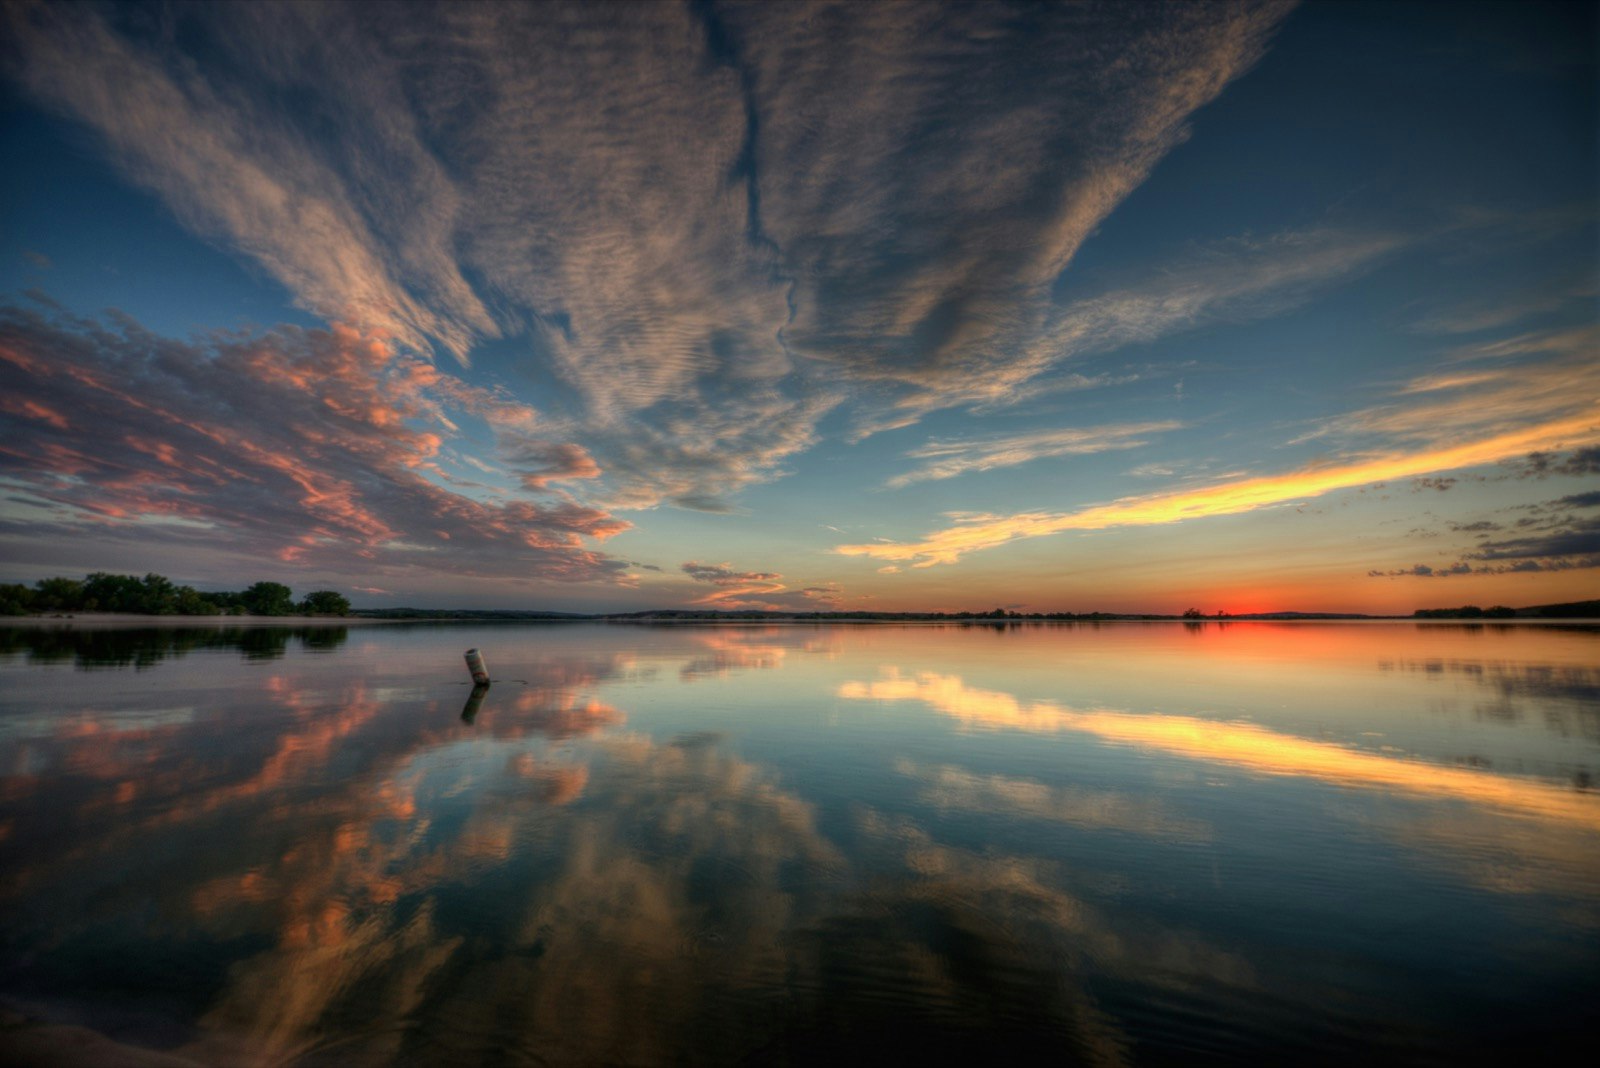 Clouds reflected in a lake at sunset in Nebraska